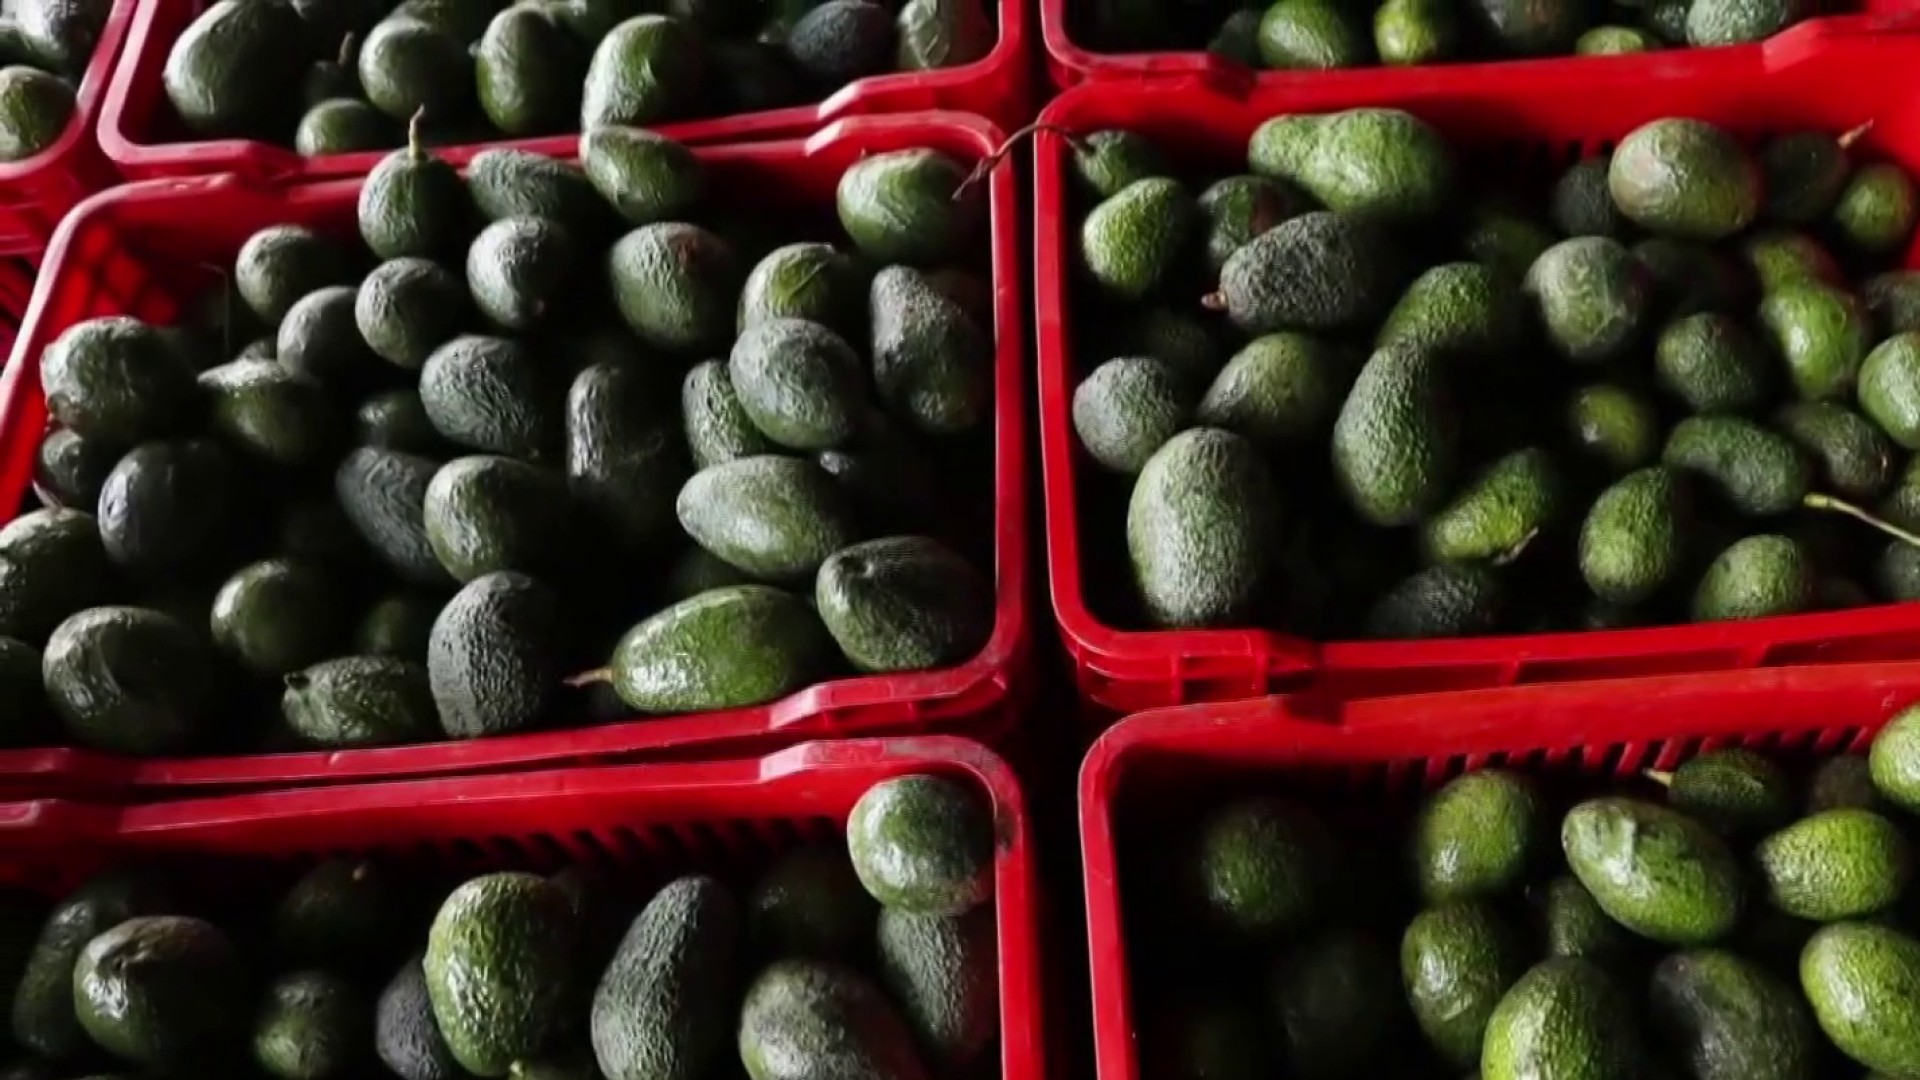 U.S. Halts Mexican Avocado Imports After American Safety Inspector Threatened